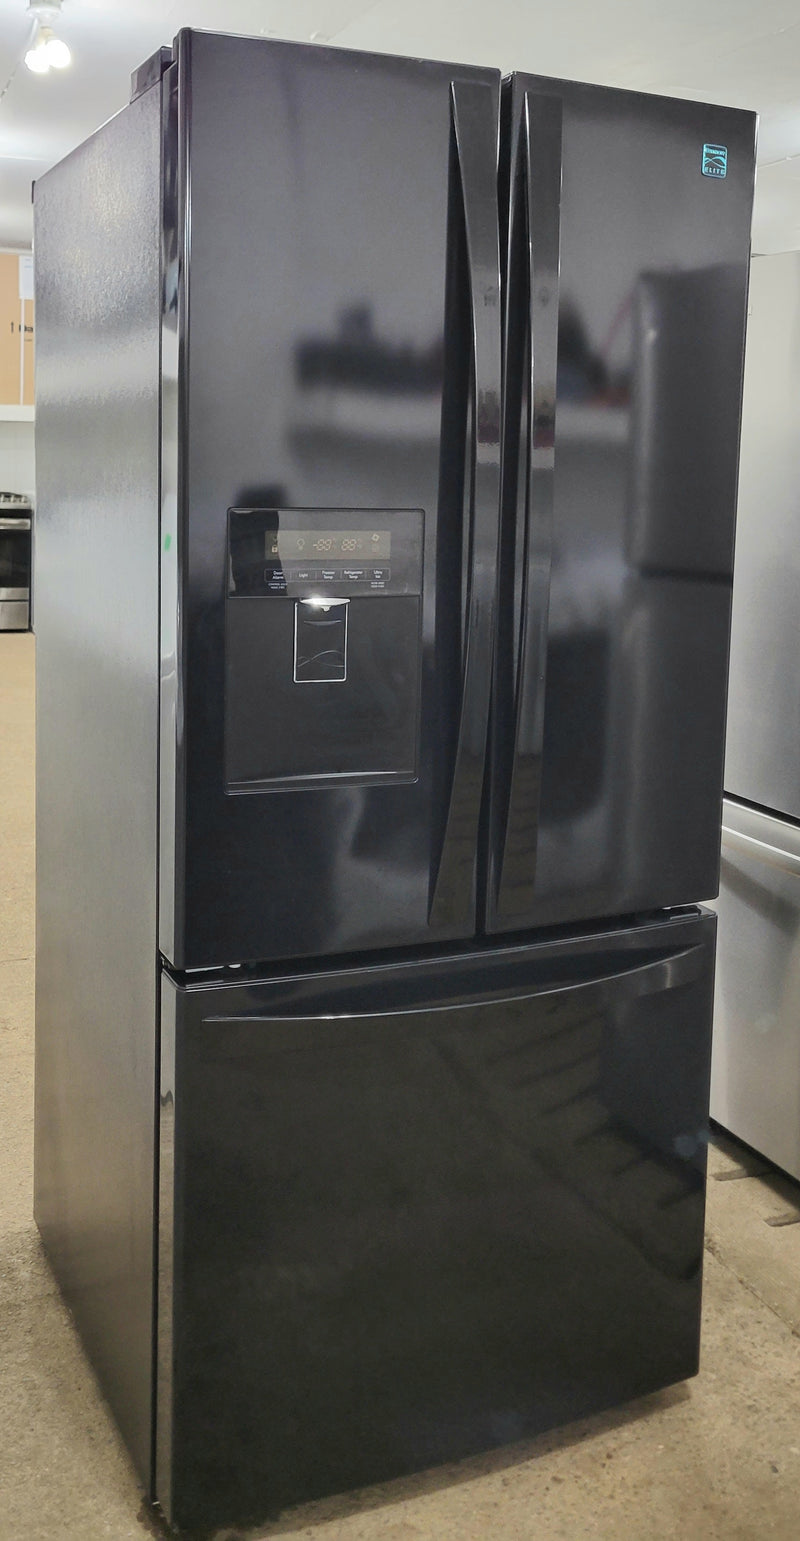 Kenmore 30" Wide Black French Door Fridge with Water and Ice Maker, Free 60 Day Warranty